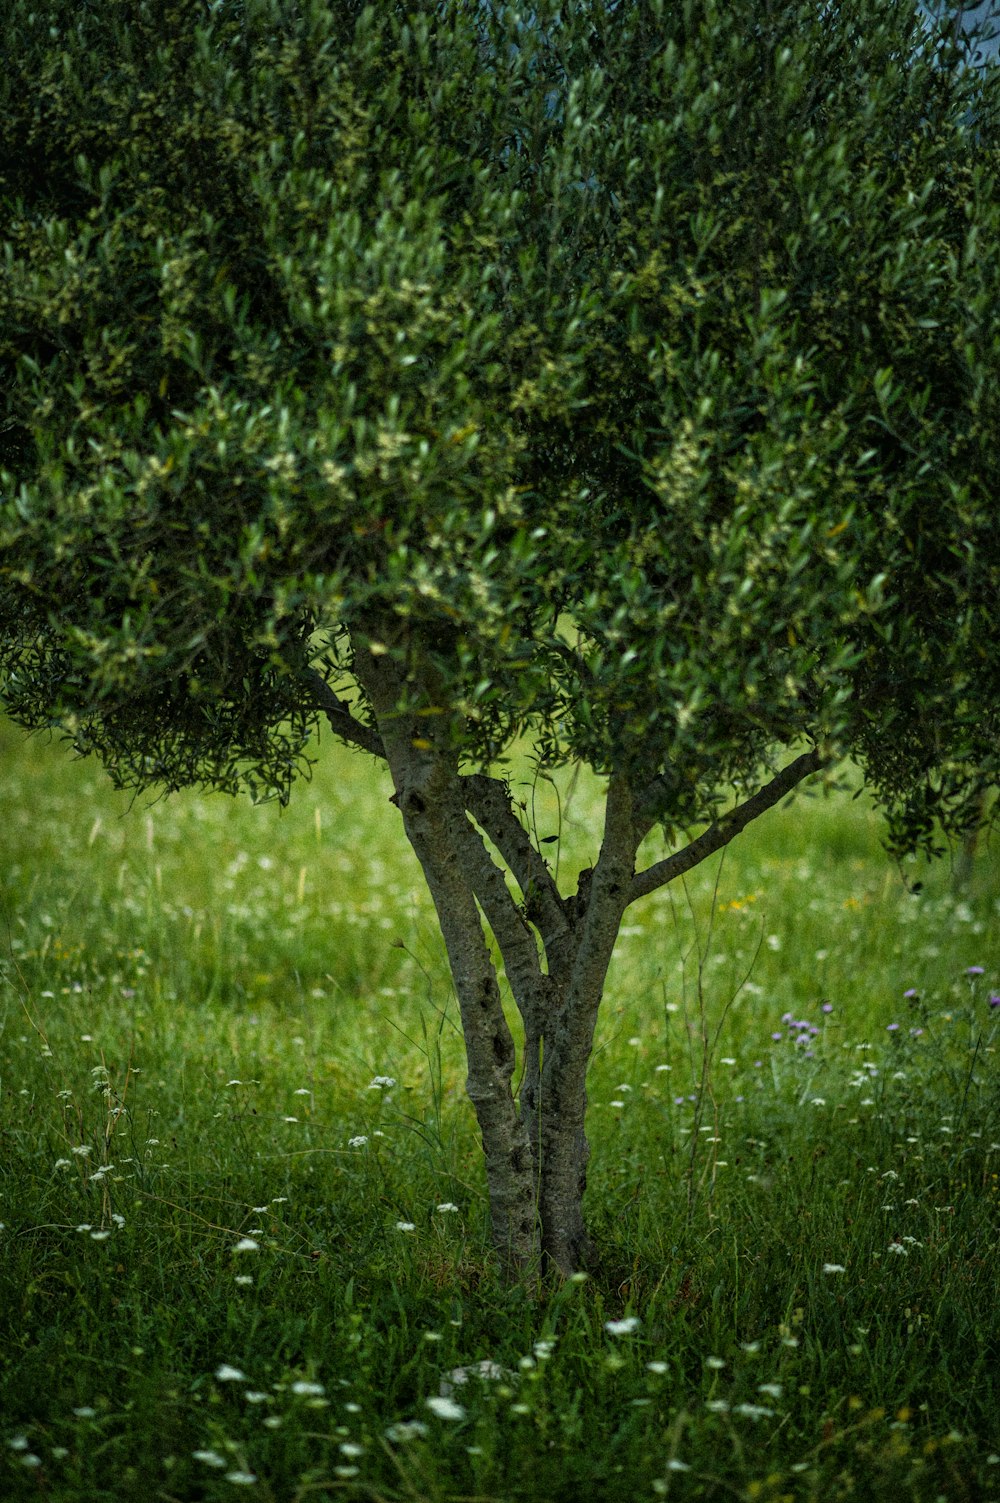 a small tree in the middle of a grassy field